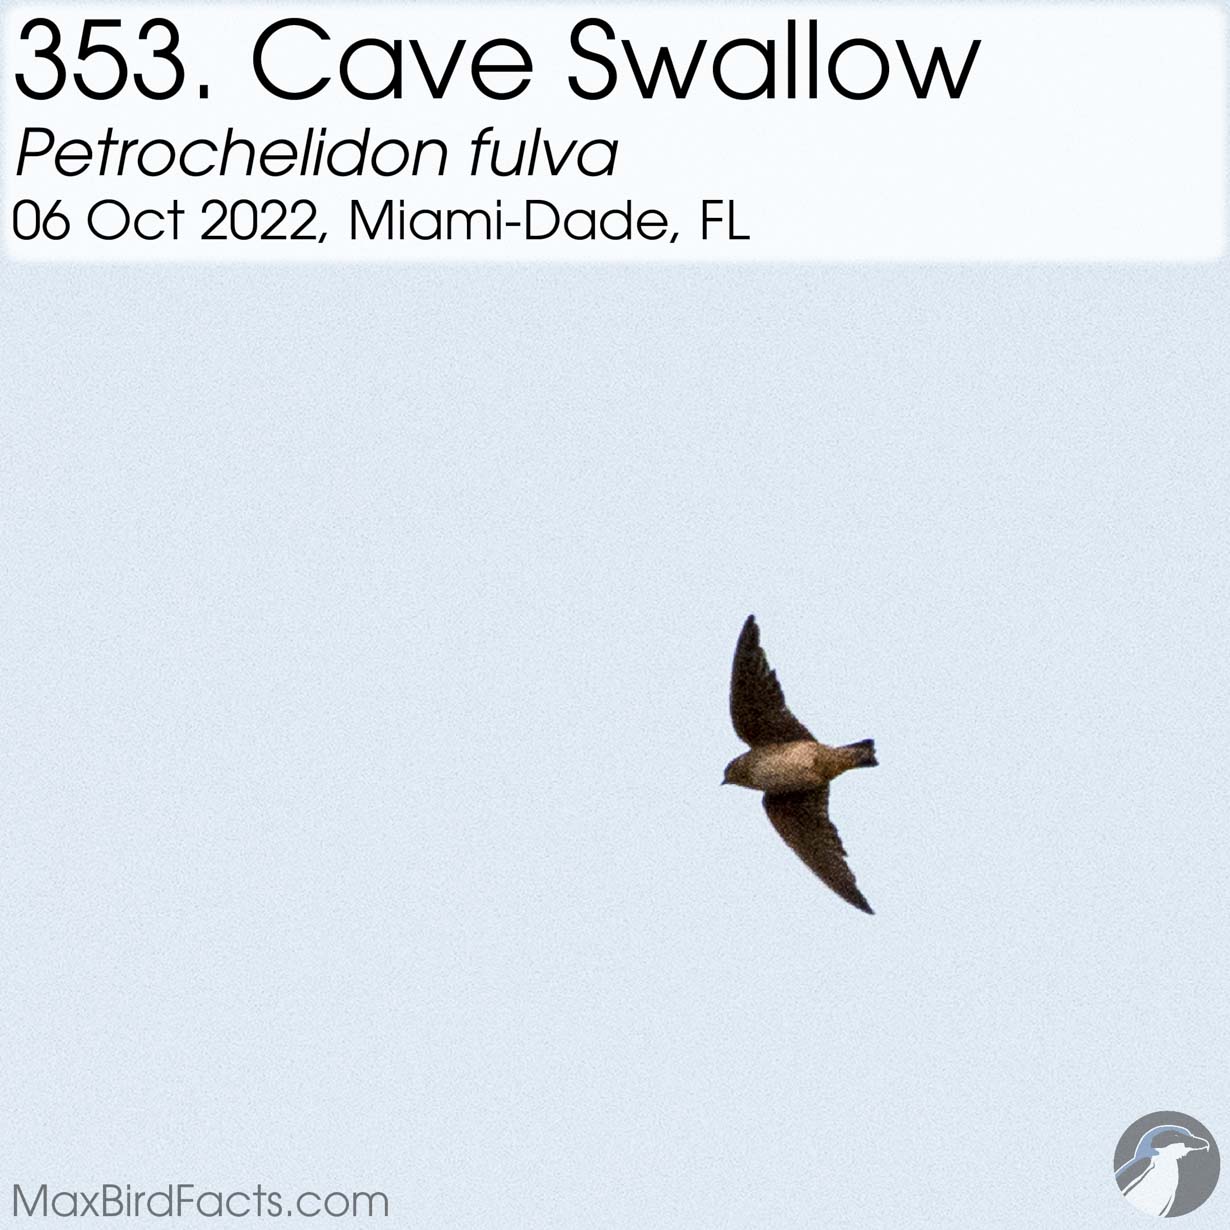 cave swallow